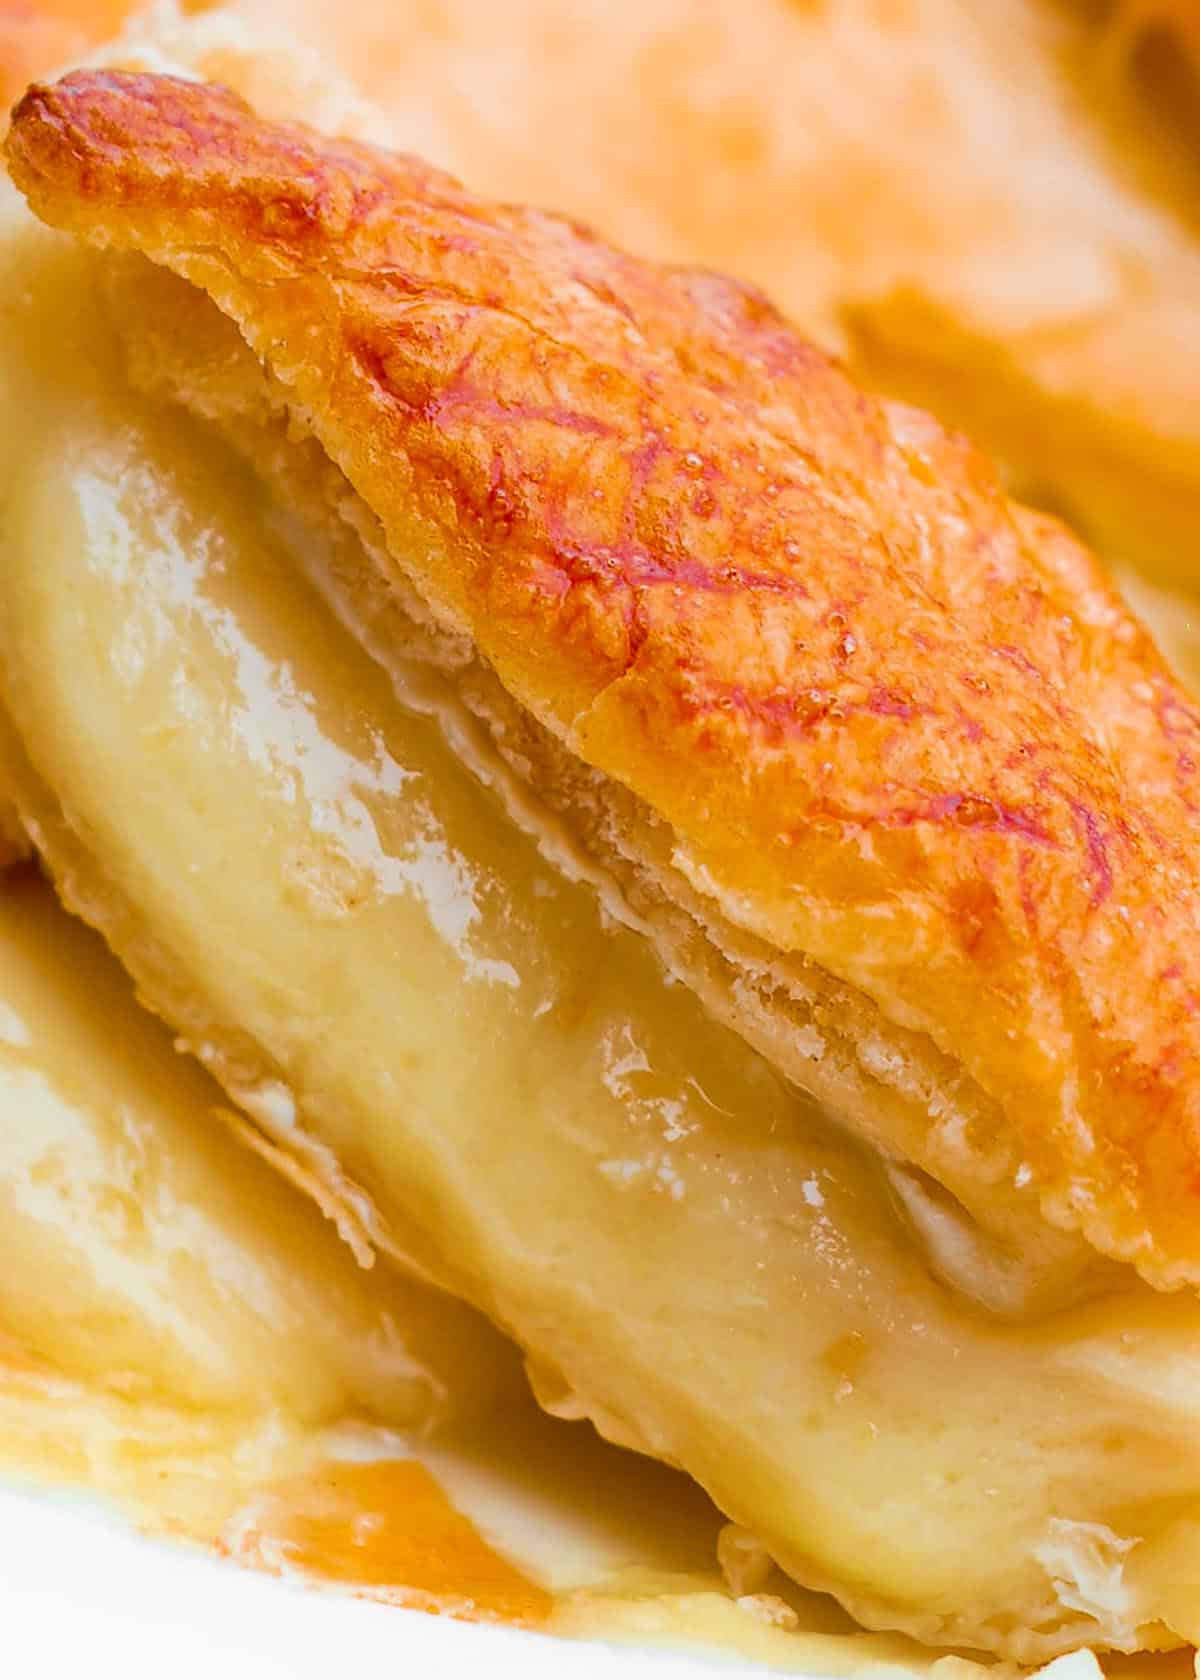 Brie bread slice with melted cheese